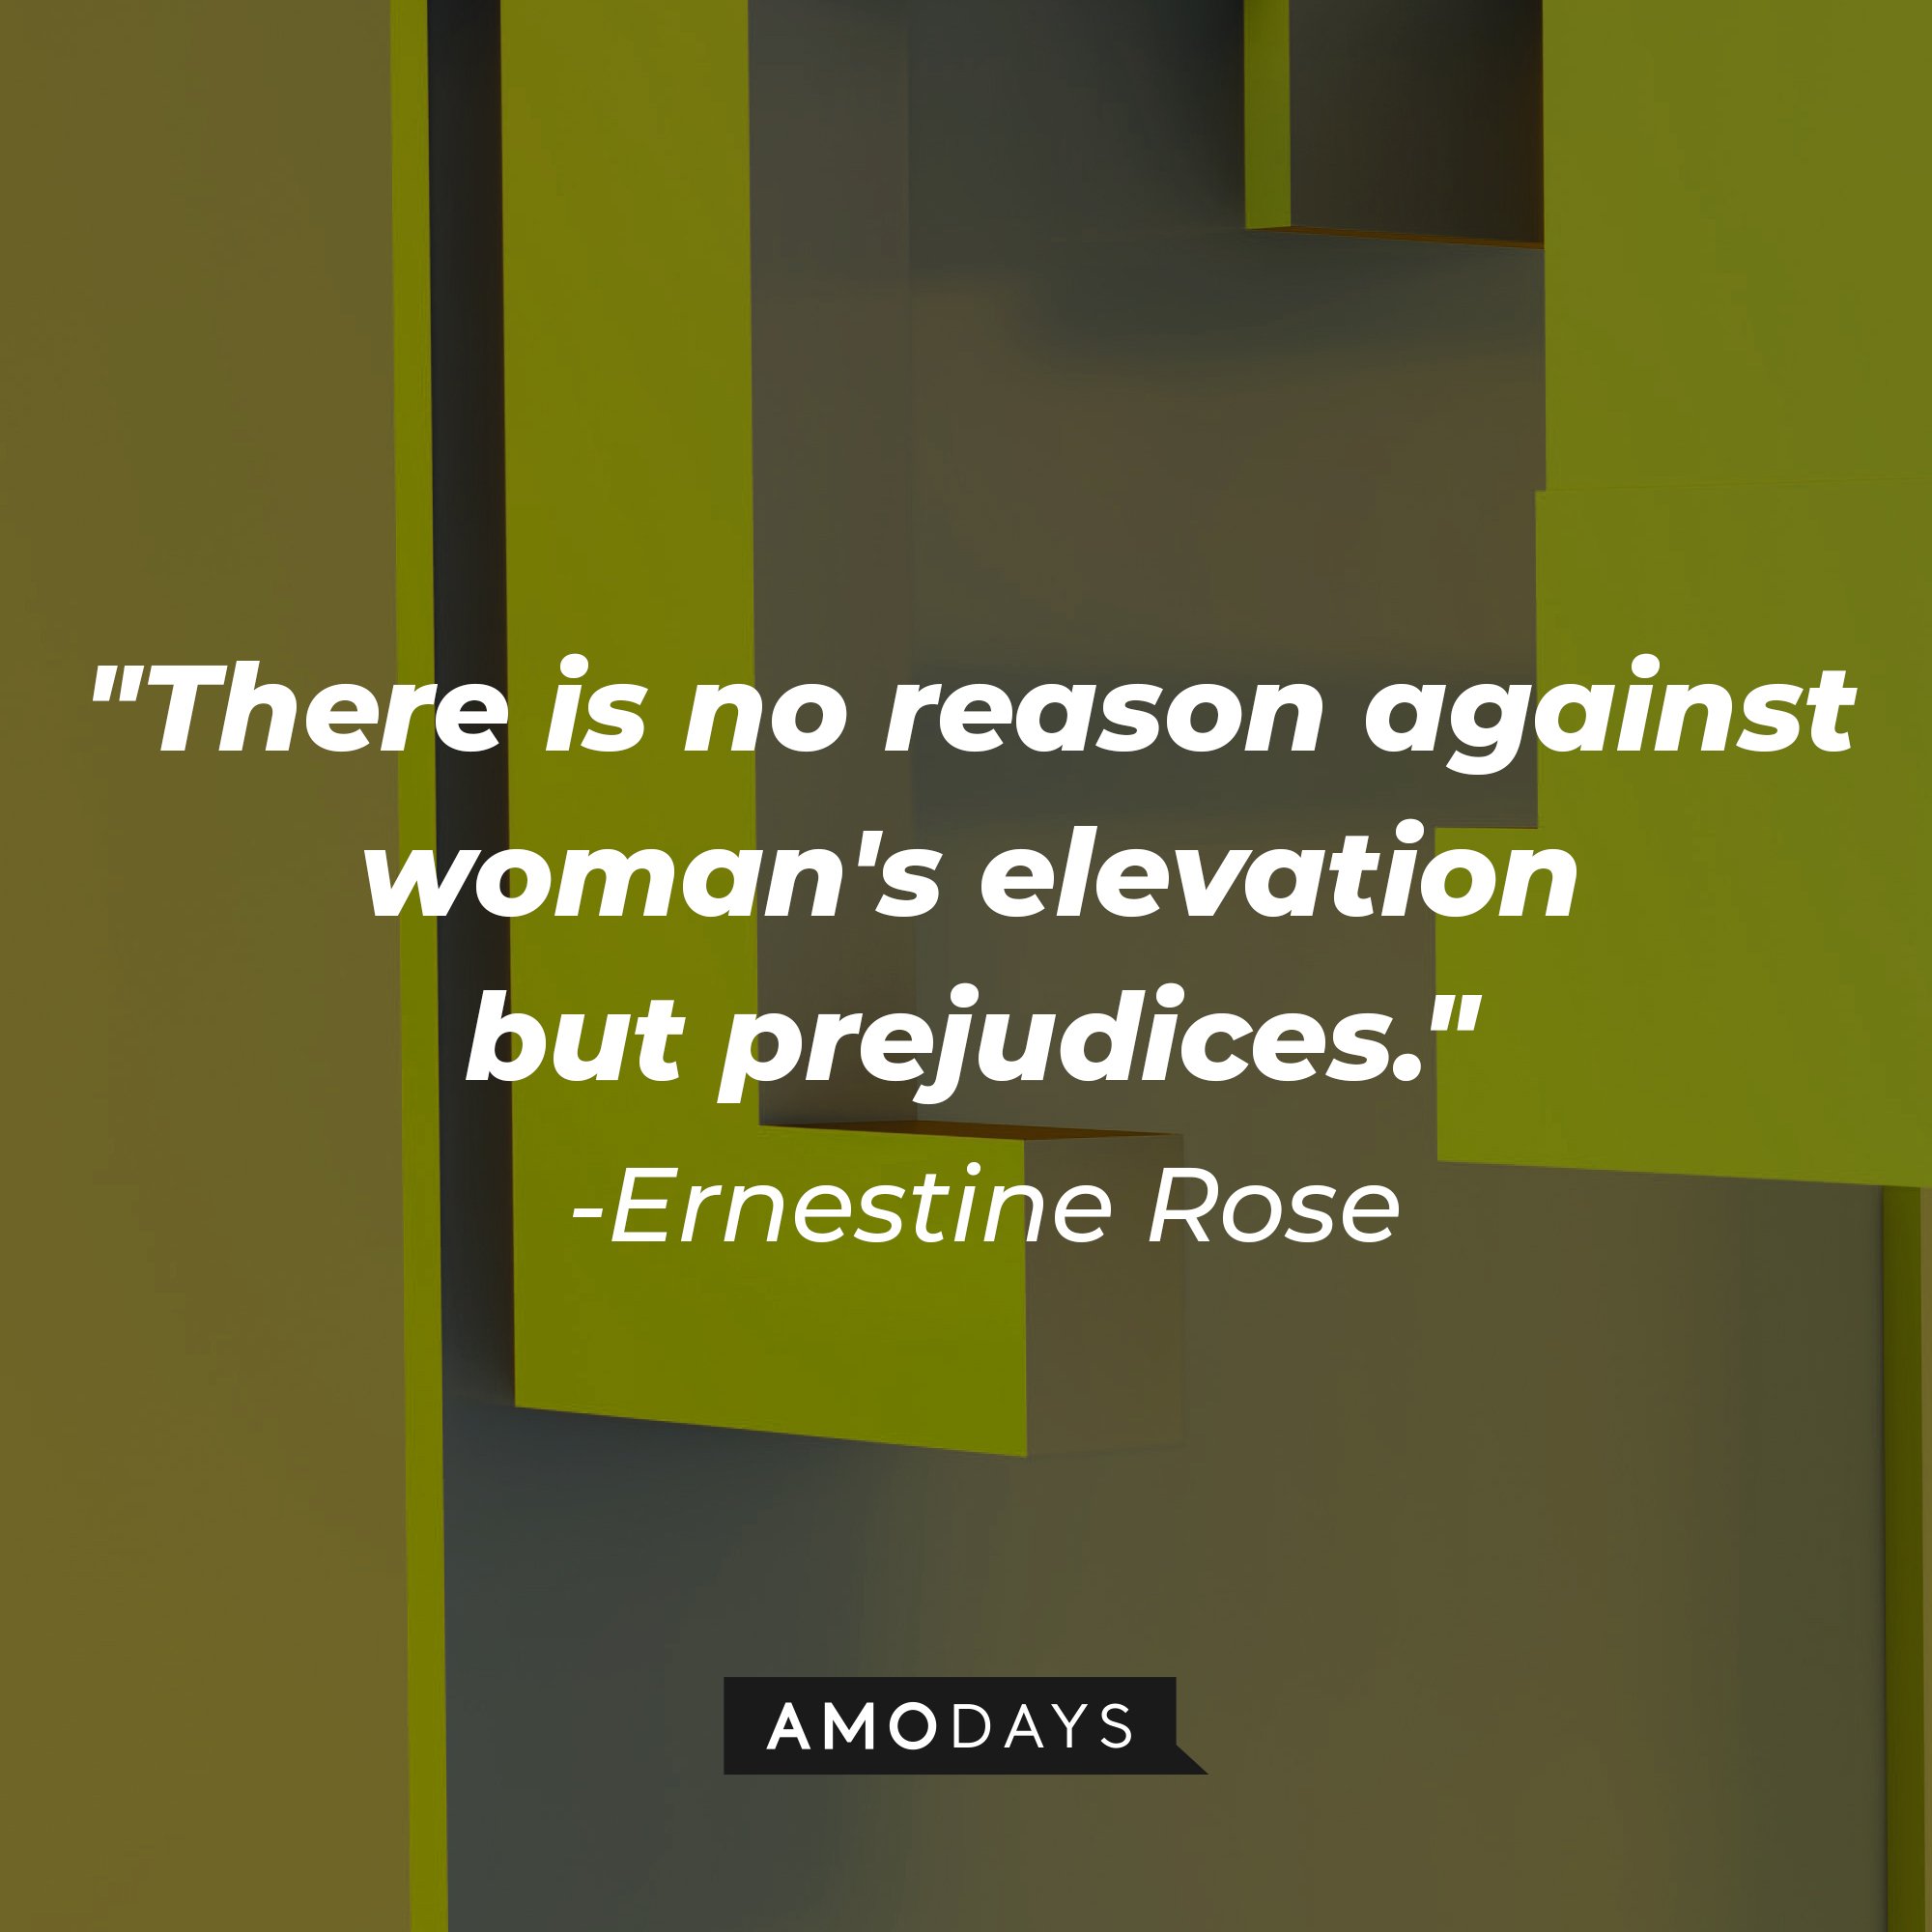  Ernestine Rose’s quote: "There is no reason against woman's elevation but prejudices." | Image: AmoDays